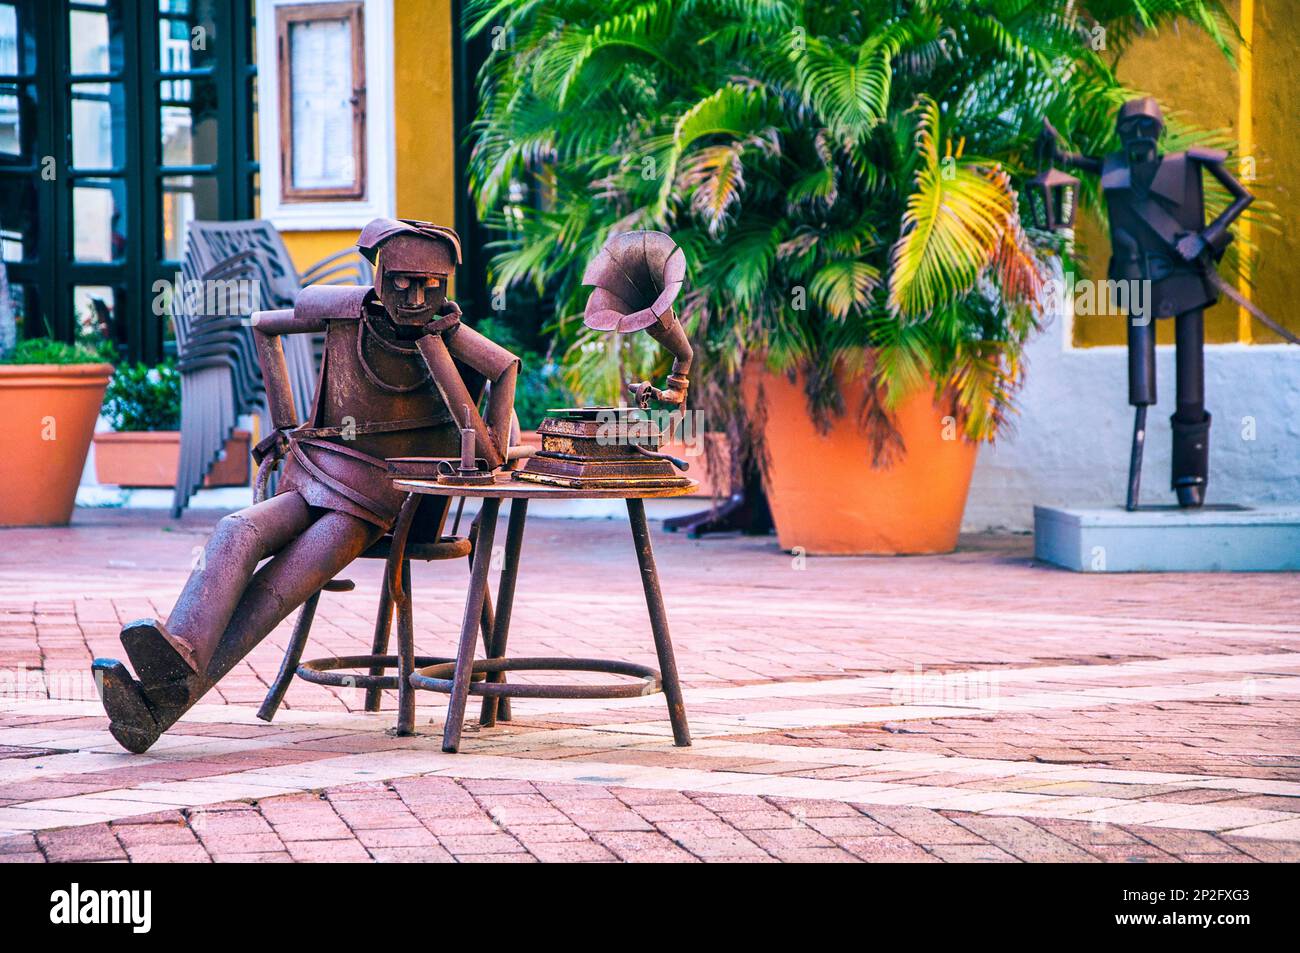 Works of art made with iron in the streets of Cartagena, Colombia Stock Photo